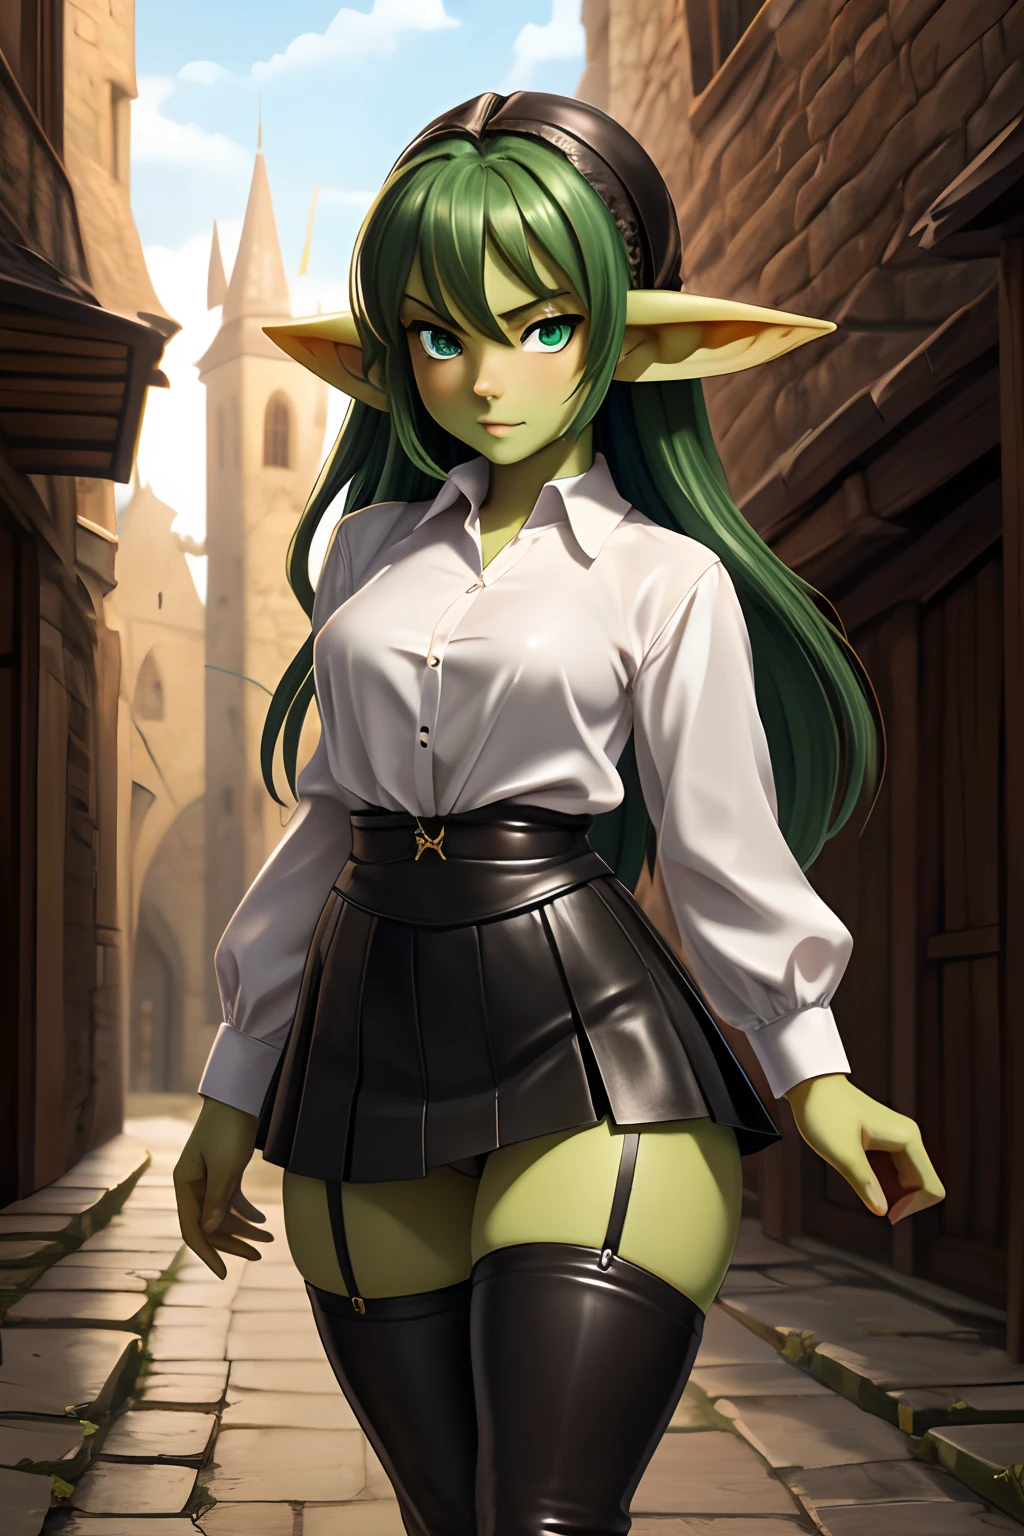 Goblin Girl, Short stature, dark green long hair, beatiful face, sexy facial expression, Facing the camera, green skin, Skin color: green, Body glare, ((pretty eyes)), green colored eyes, ((Perfect Sexy Figure)), Ideal body shapes, big thighs, ((Subtle and beautiful)), ((Medieval Fantasy Clothing: Leather Mini Skirt Sexy Leather Stockings White Shirt)), Sexy seductive stance, Full-length, background: Medieval Dark Alley, Depth of field, ((ultra quality)), ((tmasterpiece)), clear image, crisp details, Realistic, Professional Photo Session, Clear Focus, the anime, Colorfully drawn, NSFW